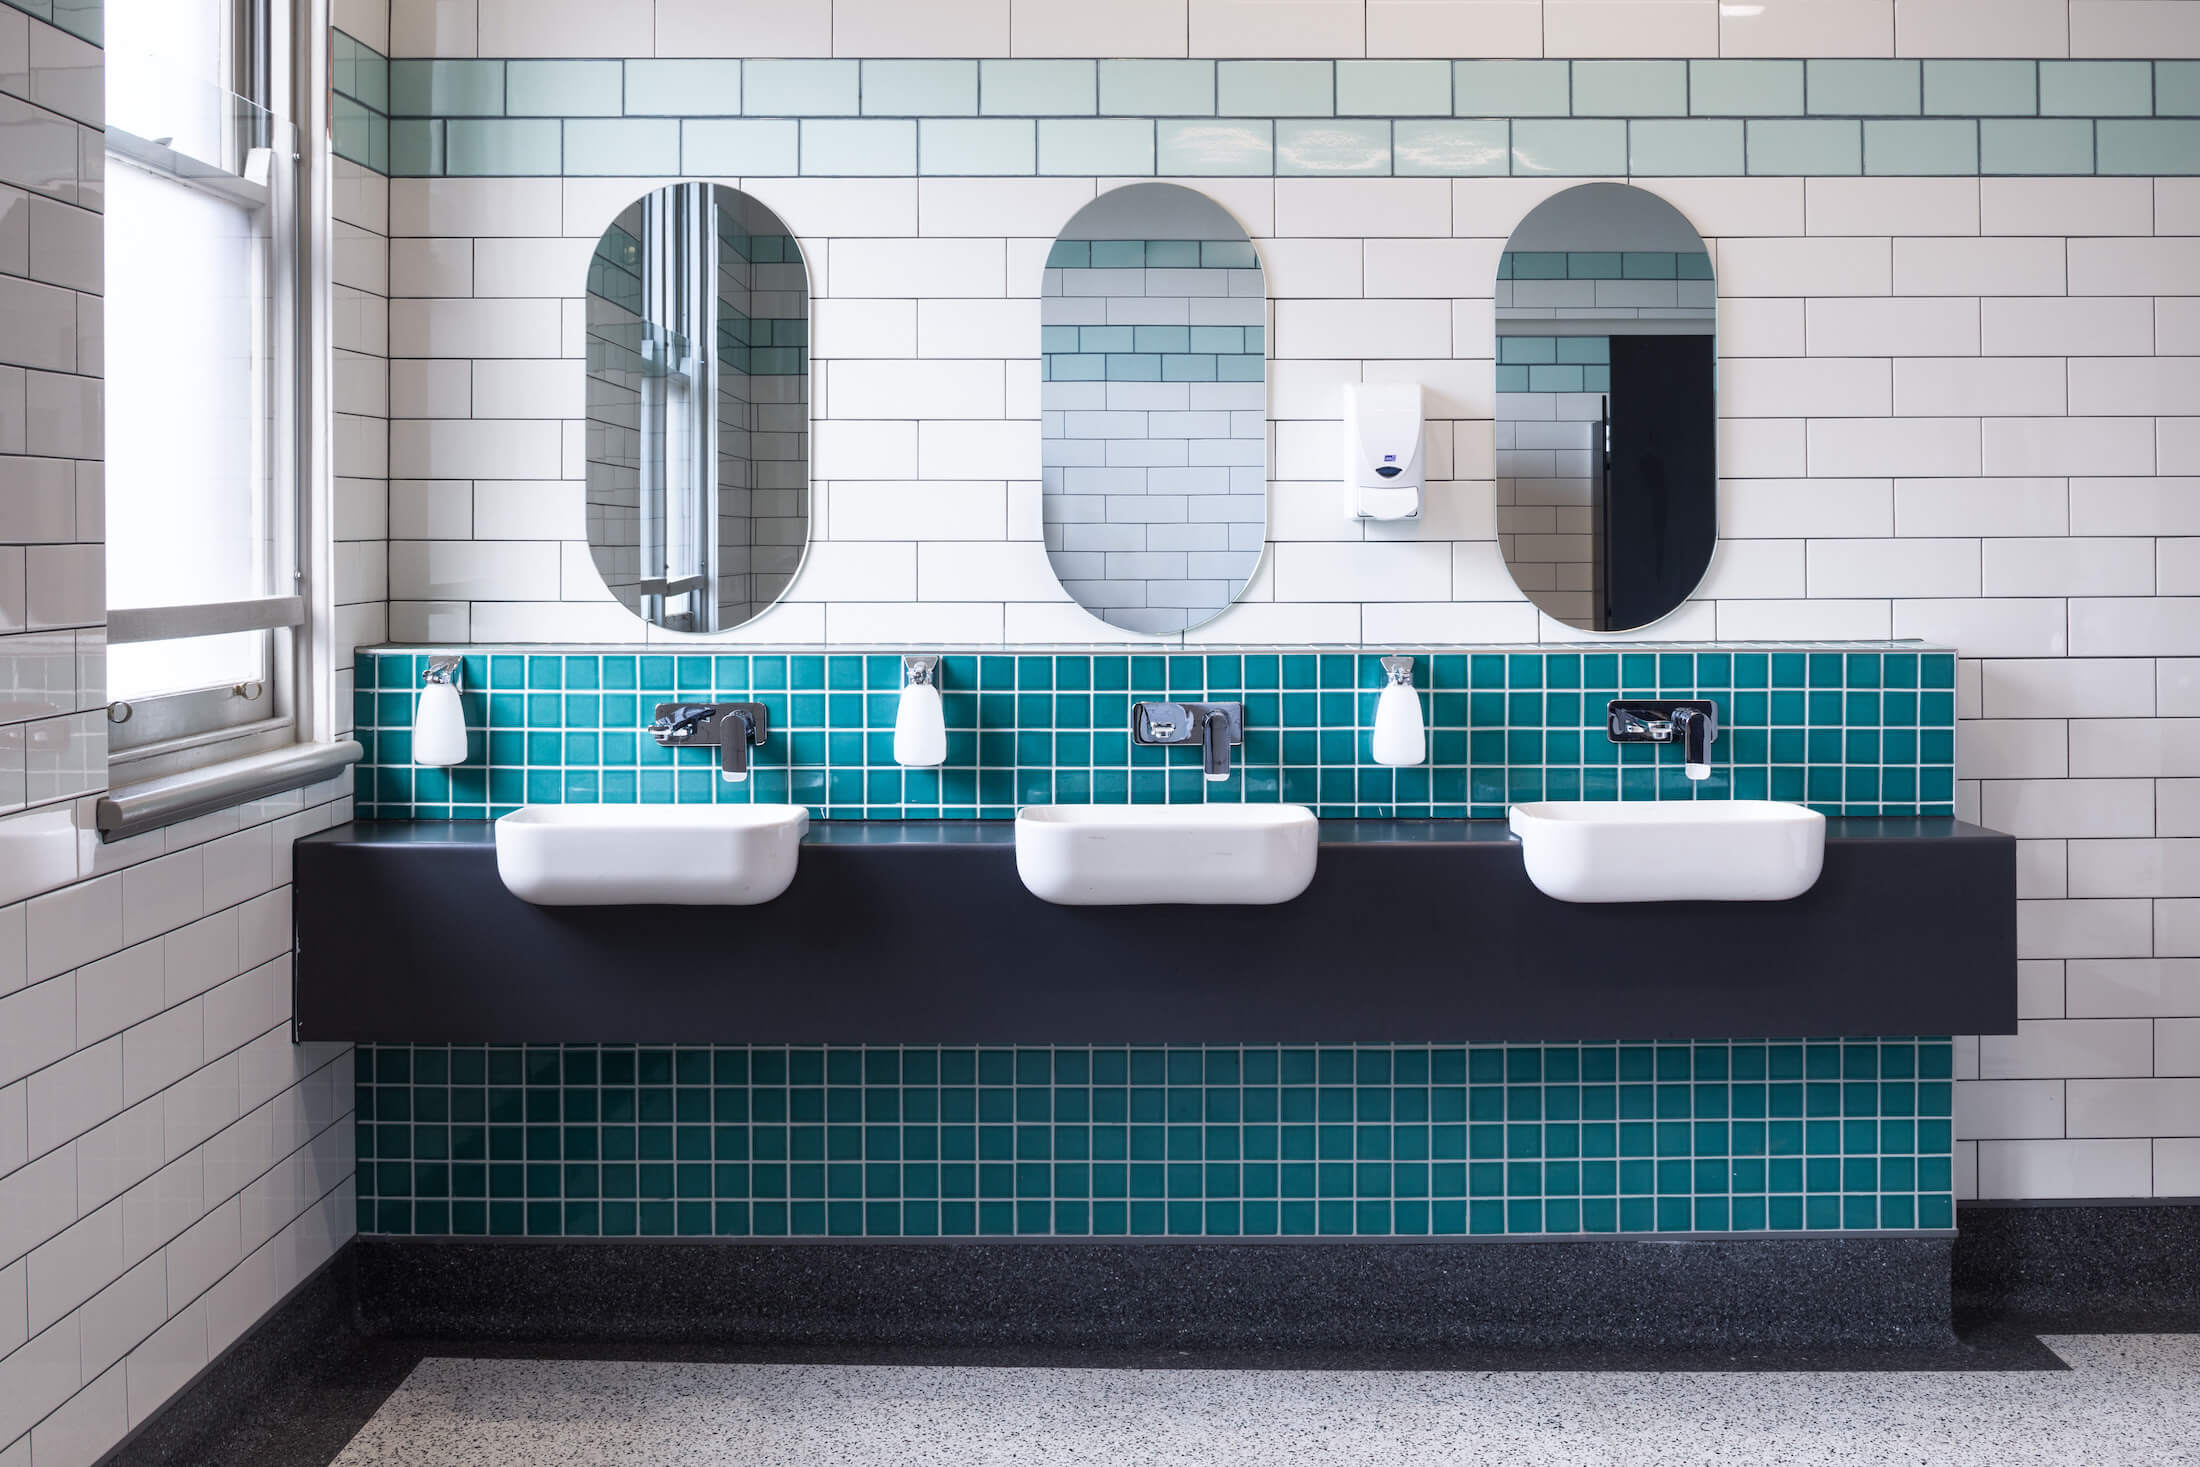 Shared bathroom with three vanities, three oval mirrors and aqua and white tiles